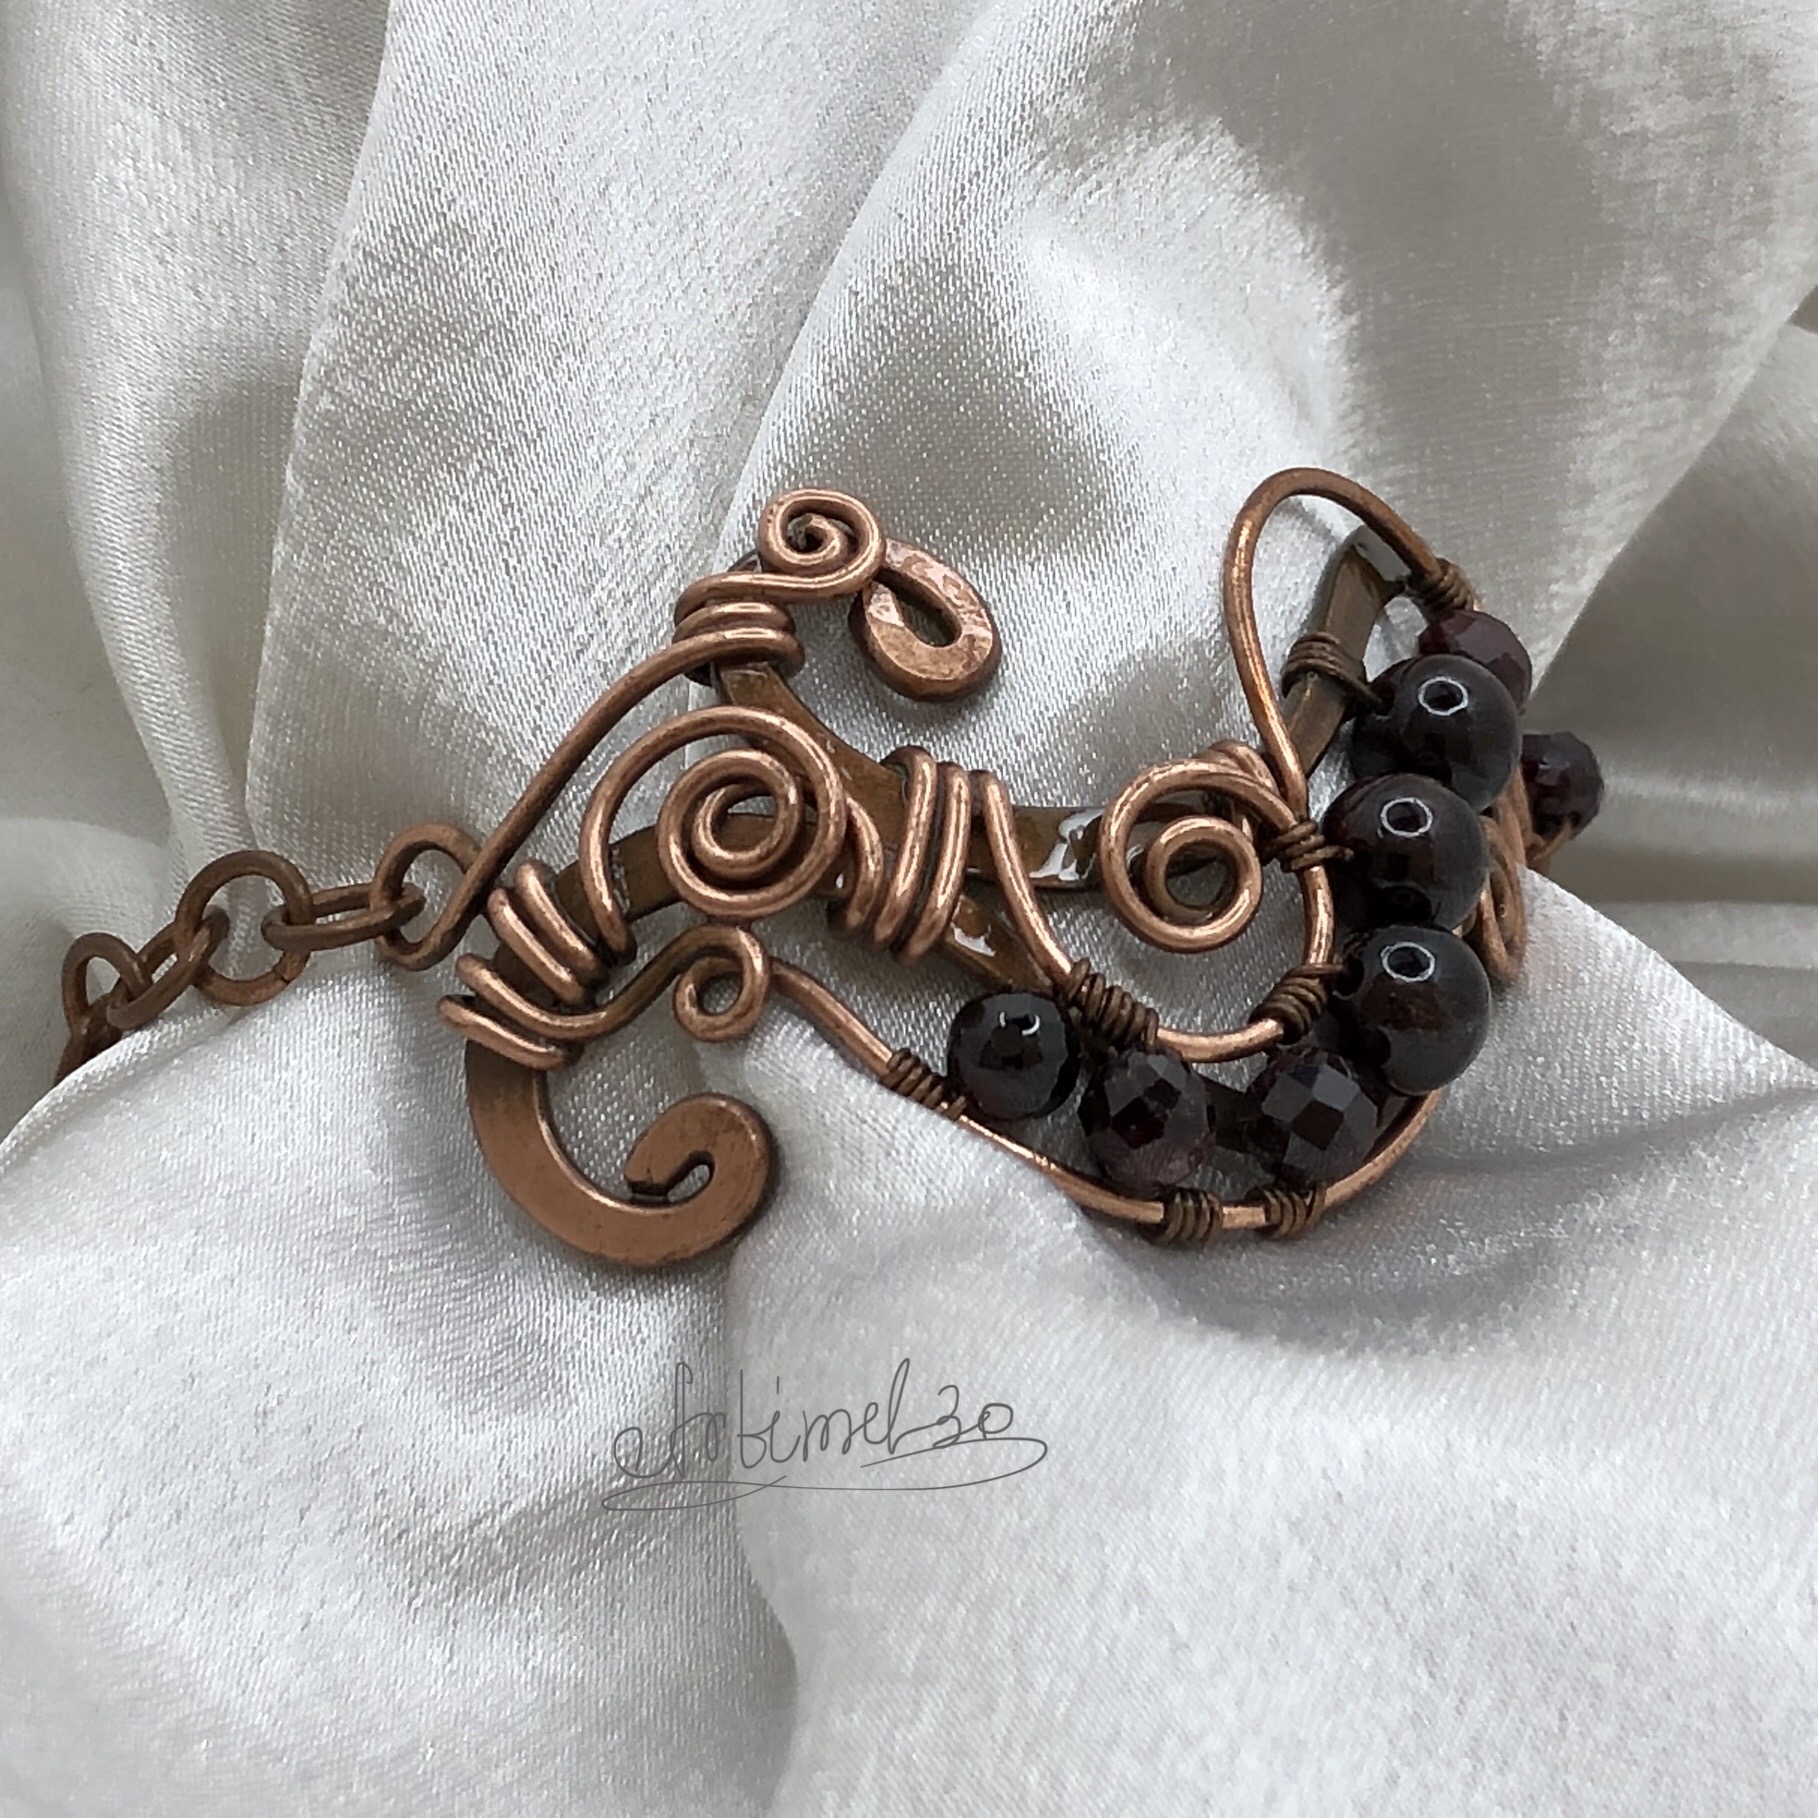 Copper Bracelet Wire wrapped Agate stone 2